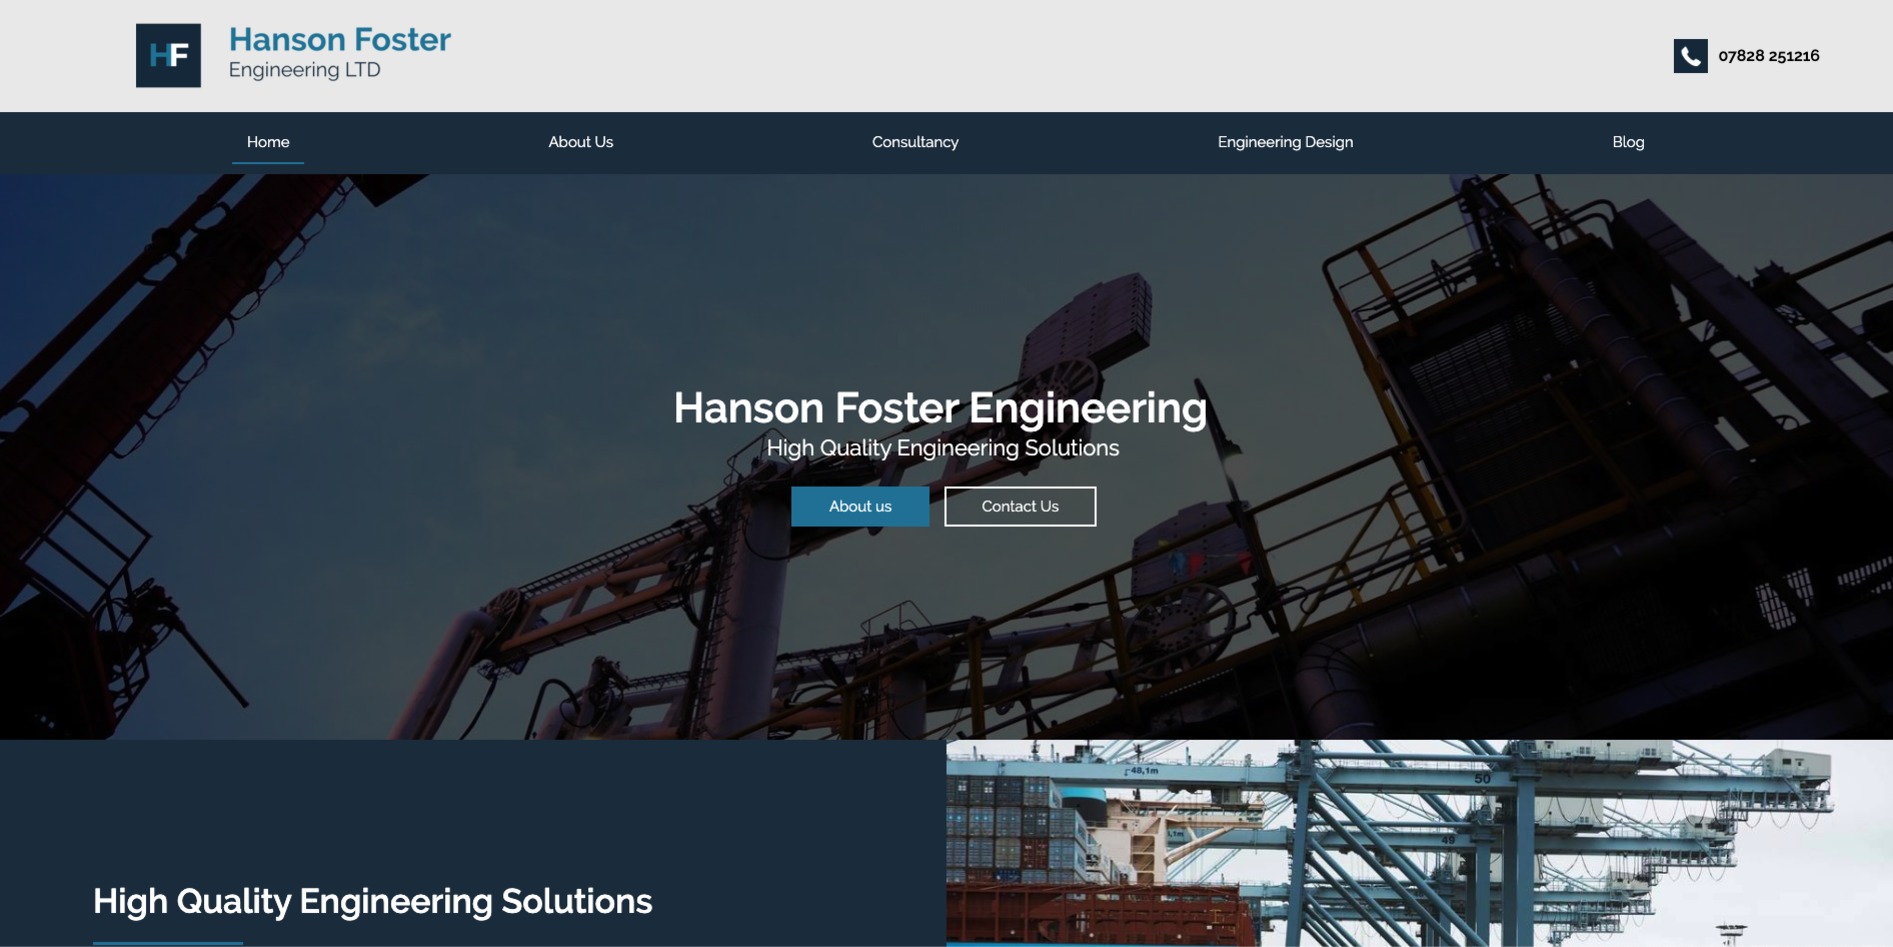 The new Hanson Foster website designed by it'seeze, displayed on desktop